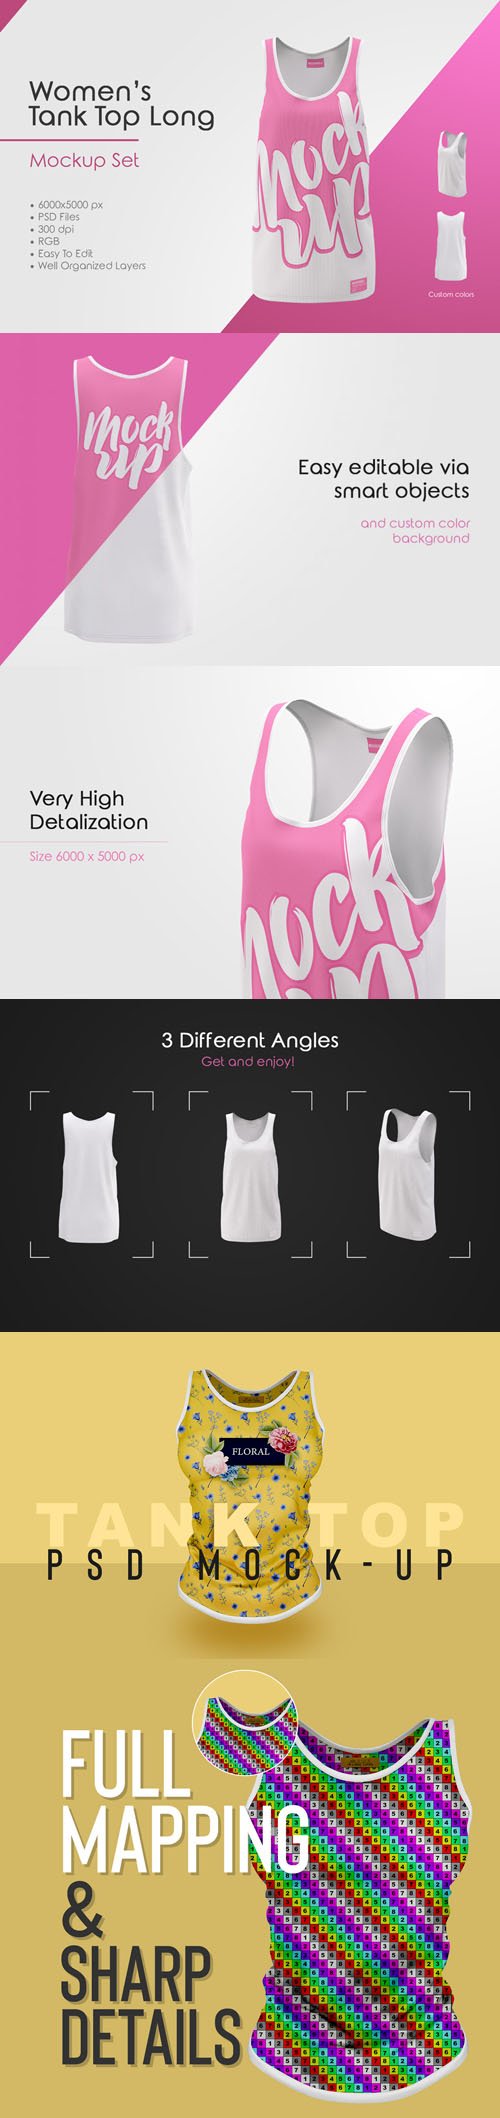 Women’s Tank Top PSD MockUps Collection